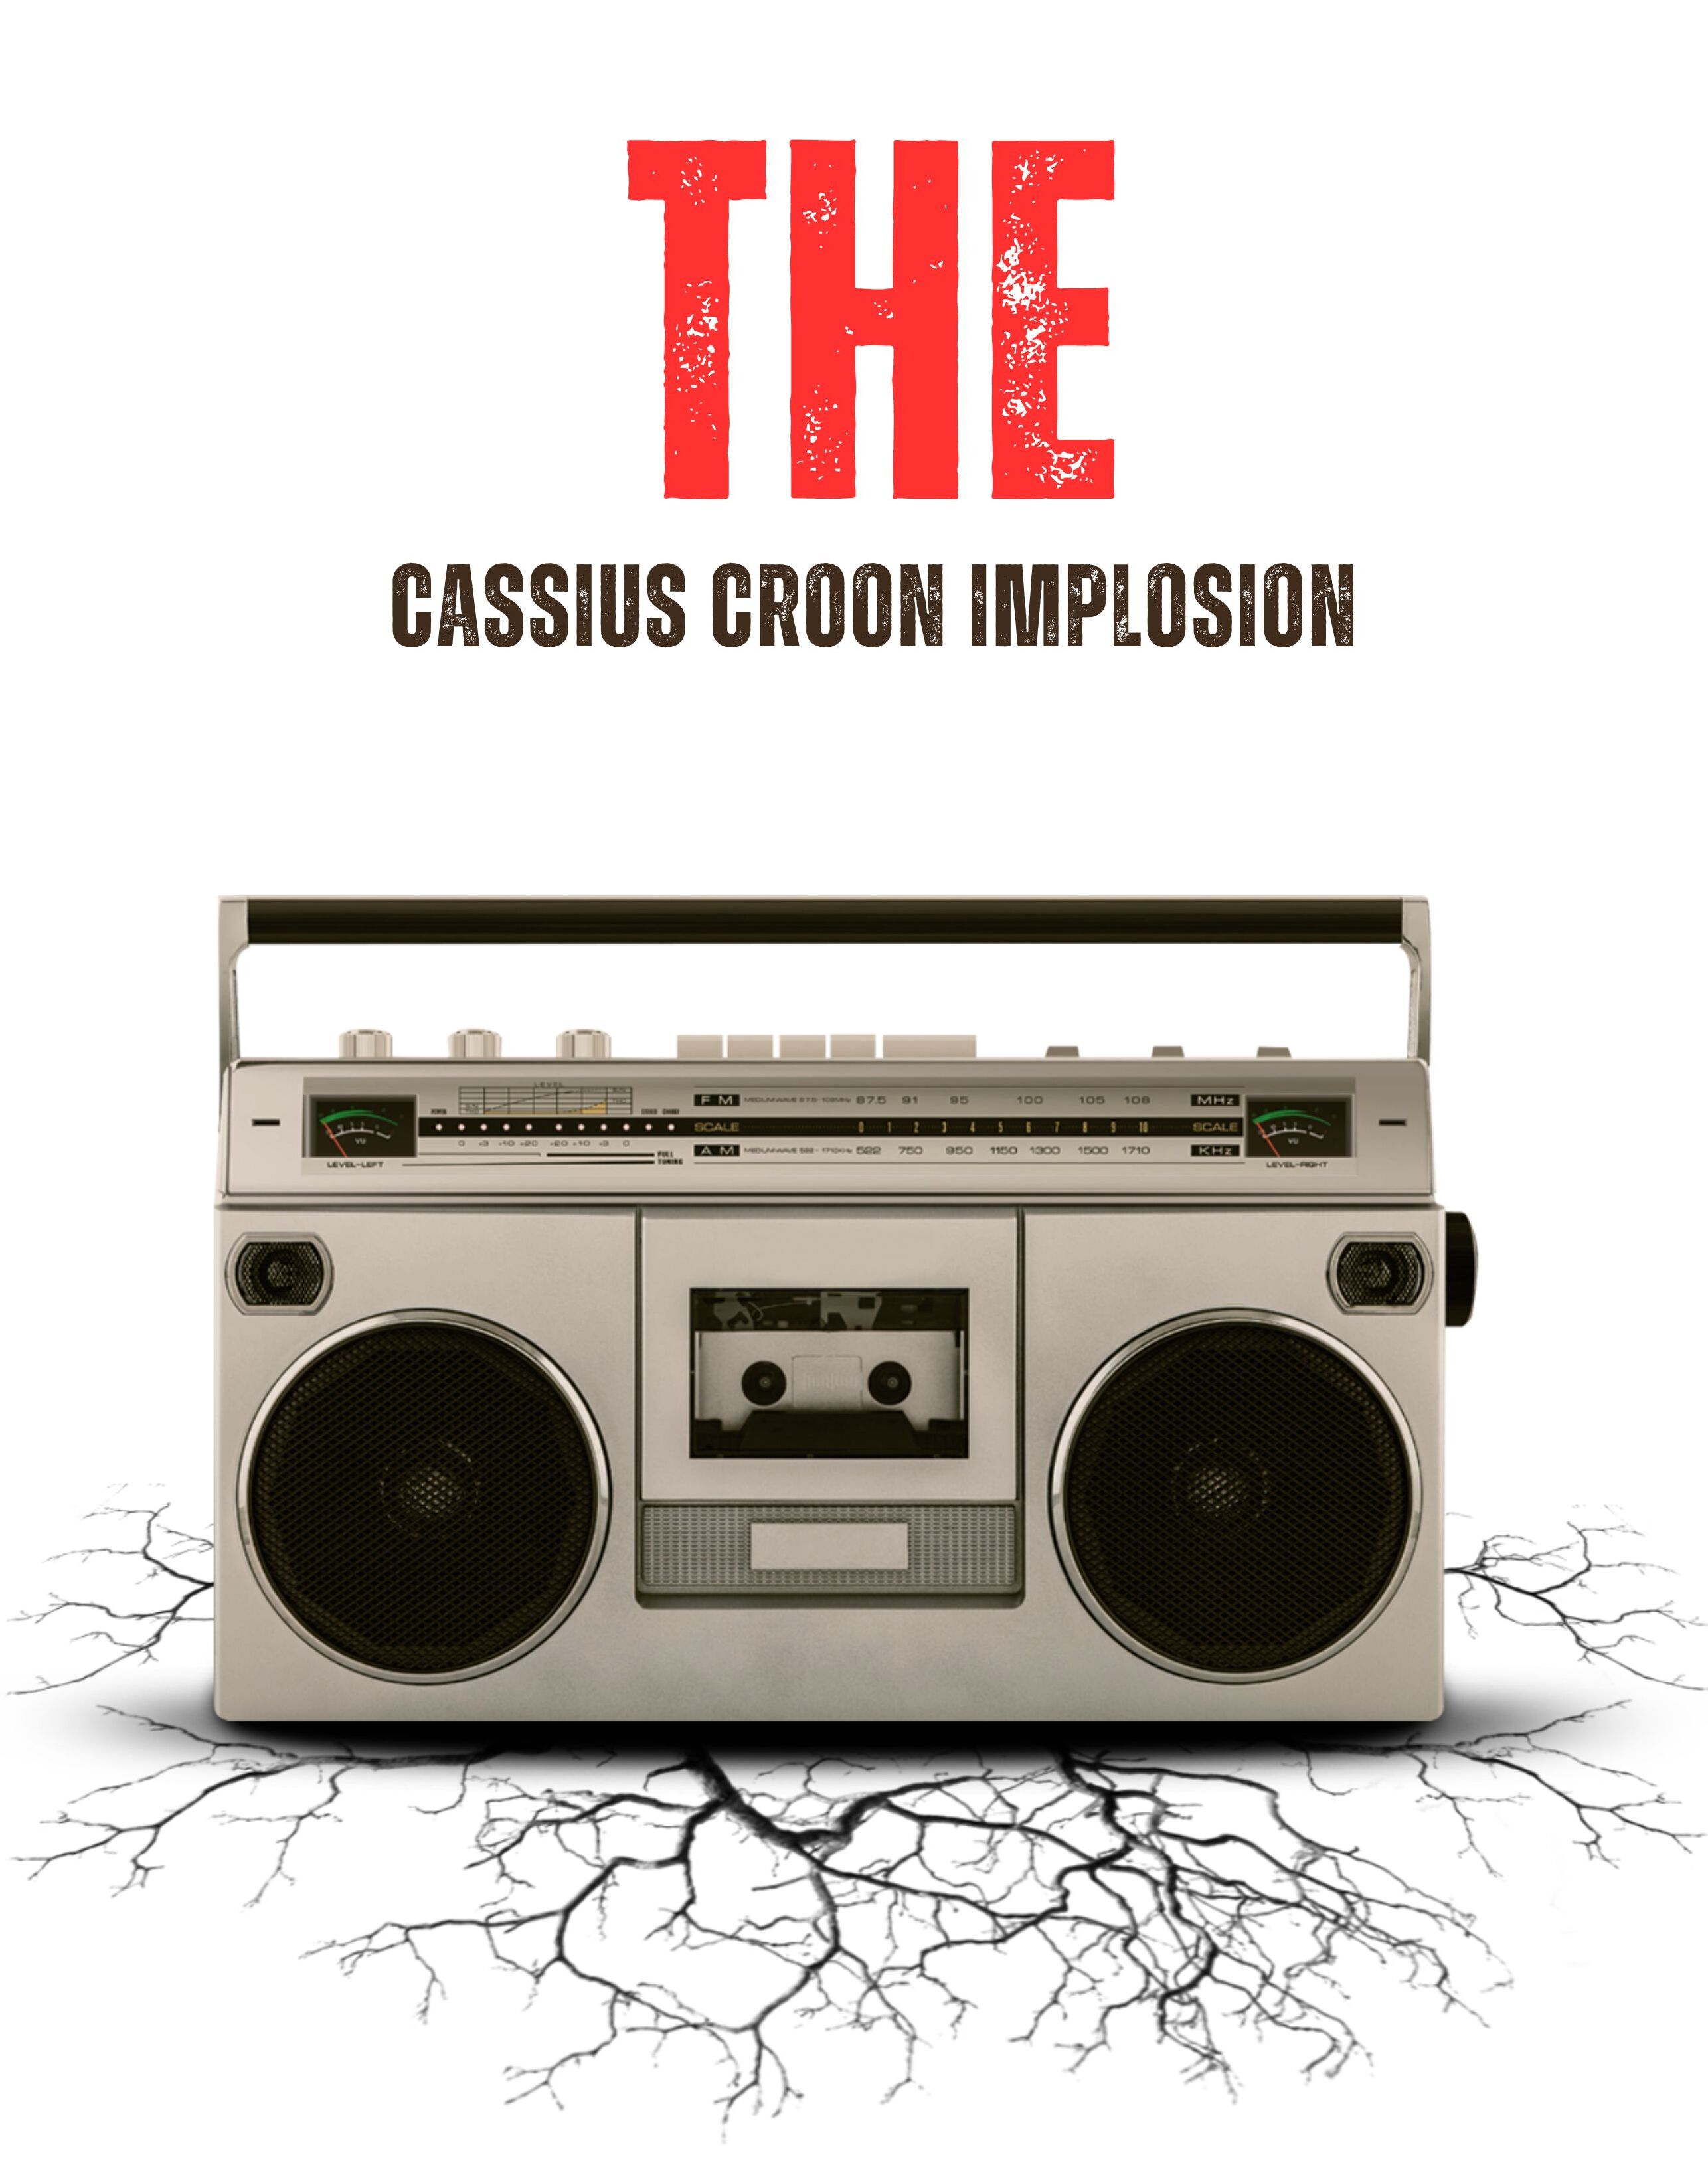 Enter the Cassius Croon Implosion!